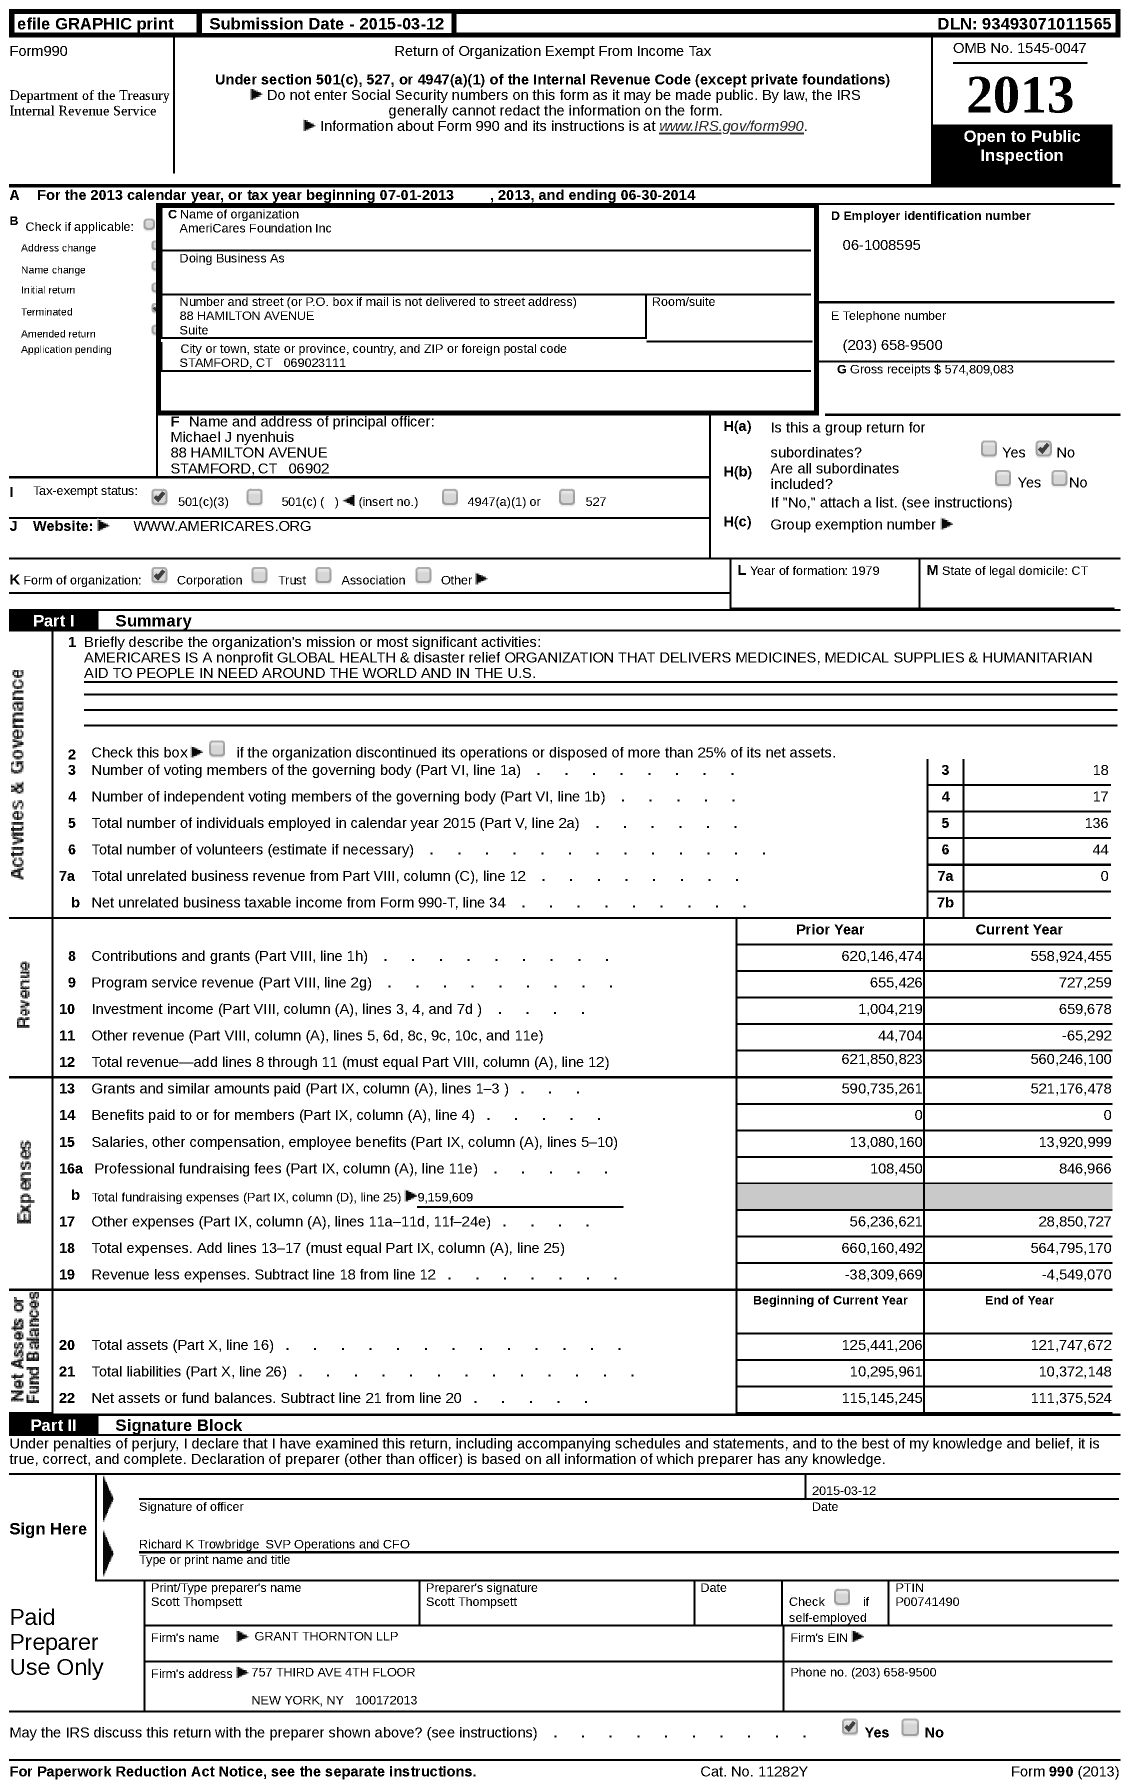 Image of first page of 2013 Form 990 for AmeriCares Foundation